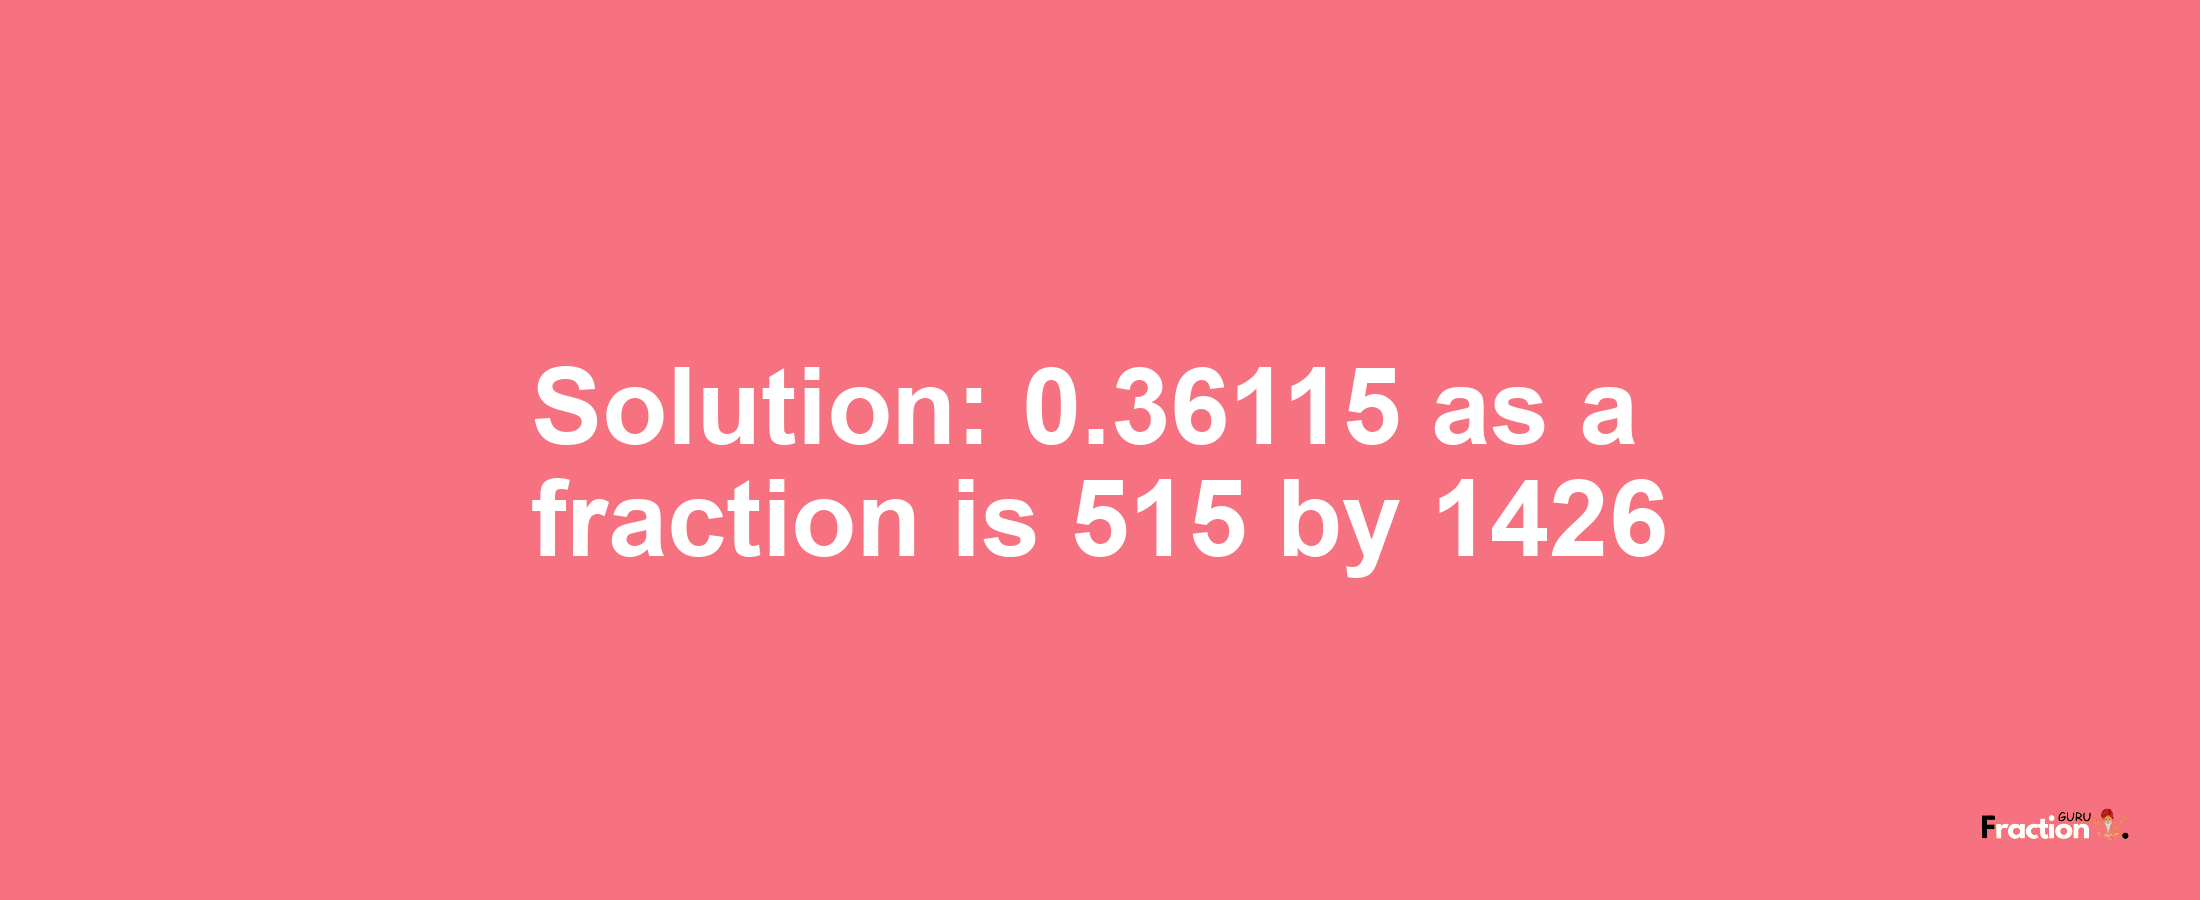 Solution:0.36115 as a fraction is 515/1426